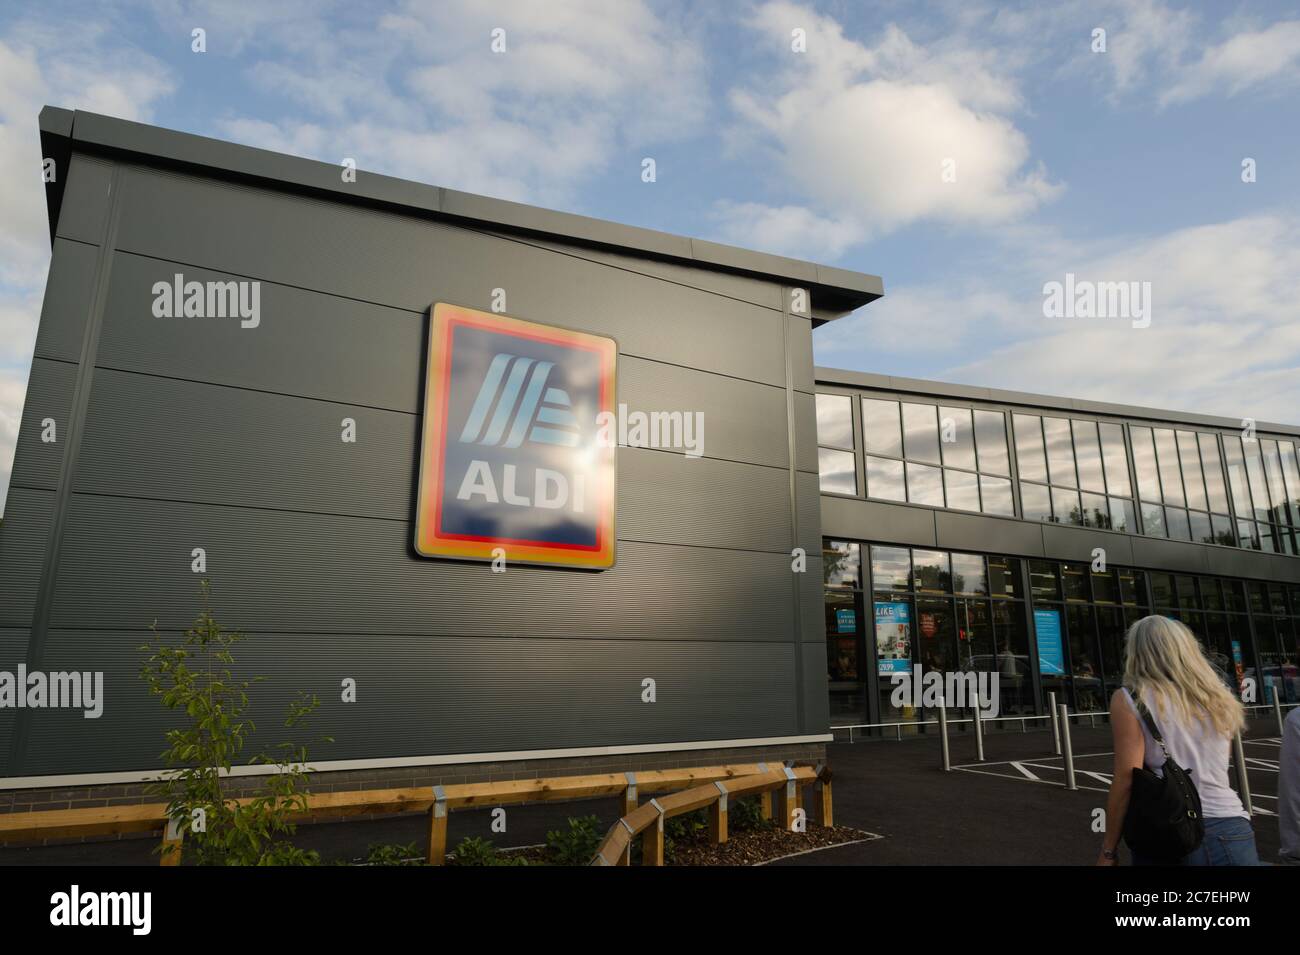 Aldi supermarket in Hertford, UK. The store was opened on the 16th July 2020. Stock Photo